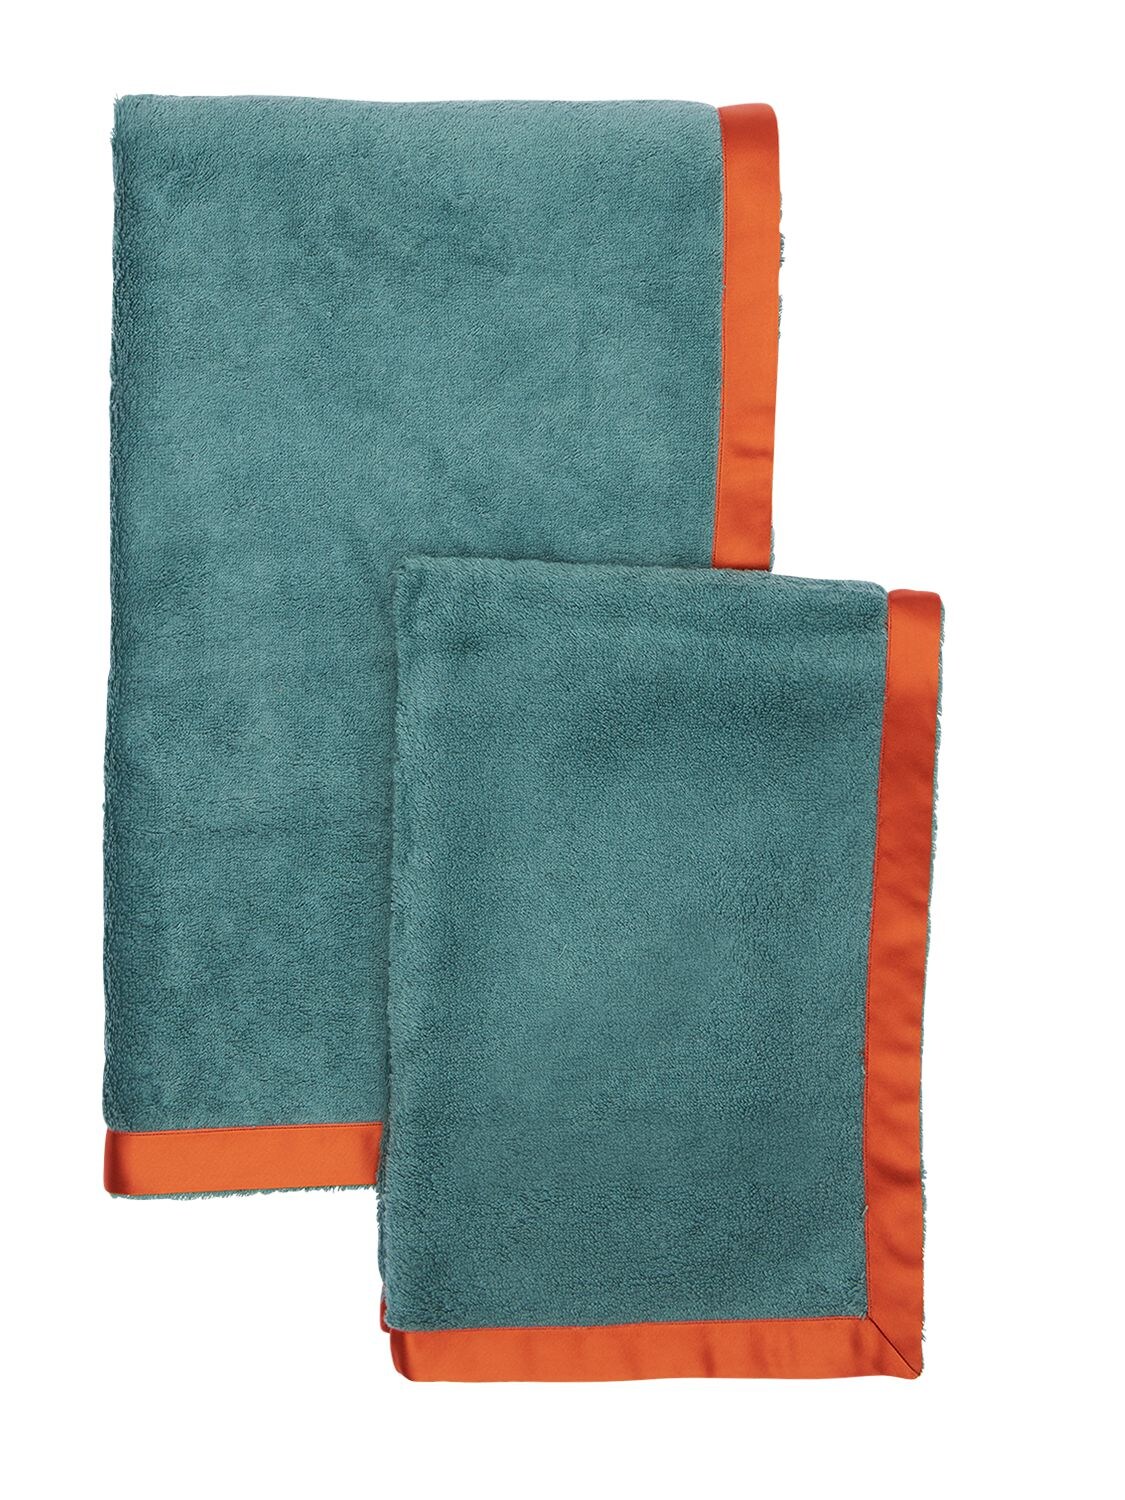 Alessandro Di Marco Set Of 2 Cotton Terrycloth Towels In Salvia,orange